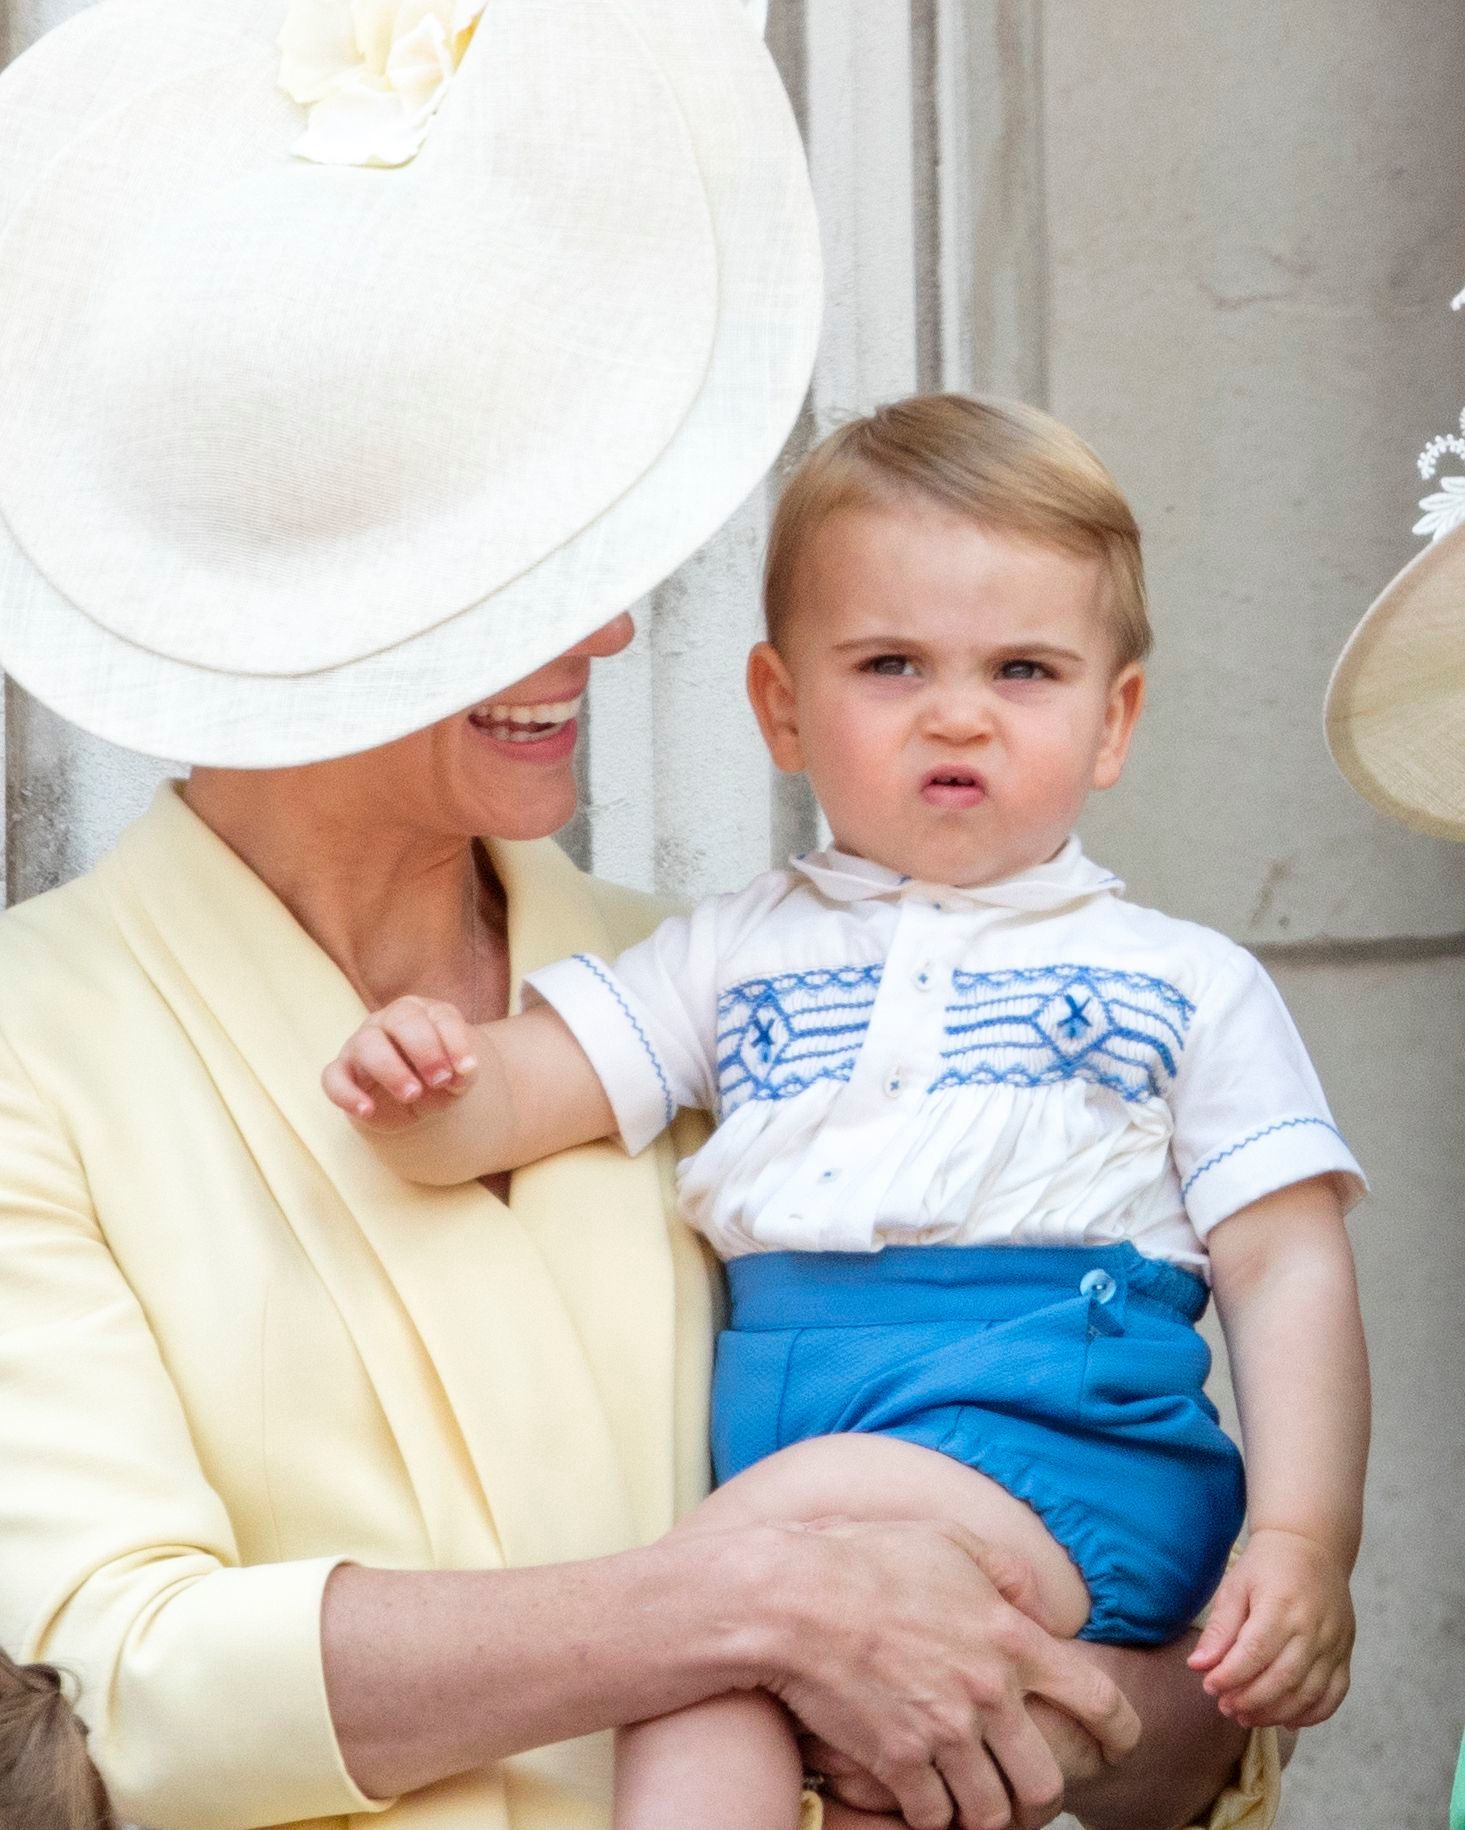 <p>That face! <a href="https://www.wonderwall.com/celebrity/profiles/overview/duchess-kate-1356.article">Duchess Kate</a> and Prince Louis celebrated <a href="https://www.wonderwall.com/celebrity/trooping-colour-2019-see-british-royal-family-queens-annual-birthday-celebration-3019935.gallery">Trooping the Colour</a> -- his first -- on the balcony at Buckingham Palace in London on June 8, 2019.</p>